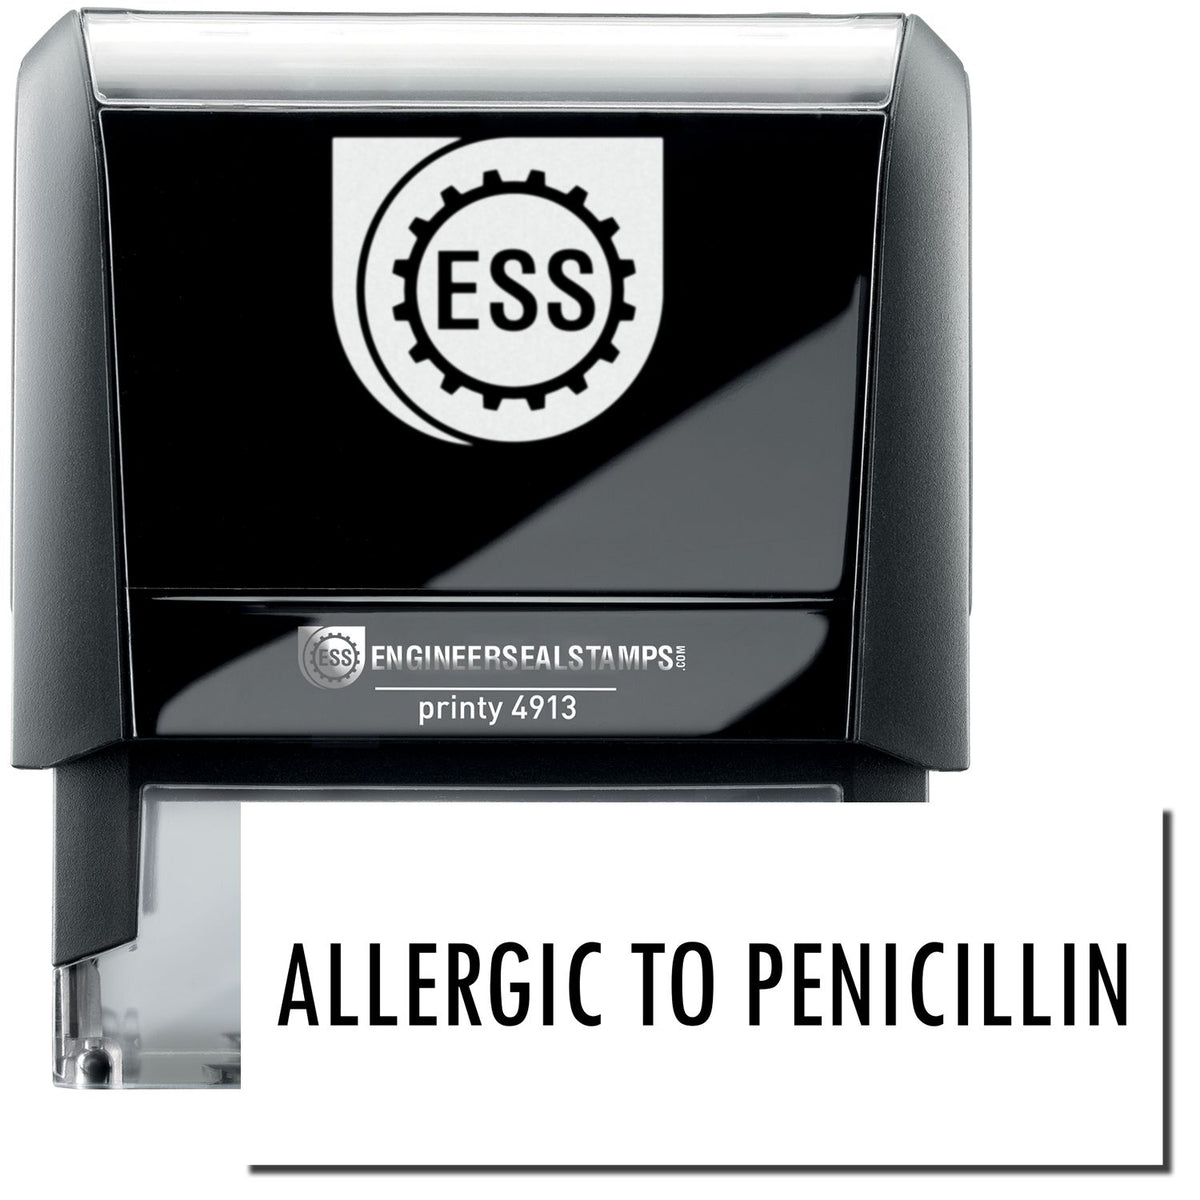 A self-inking stamp with a stamped image showing how the text &quot;ALLERGIC TO PENICILLIN&quot; in a large bold font is displayed by it.